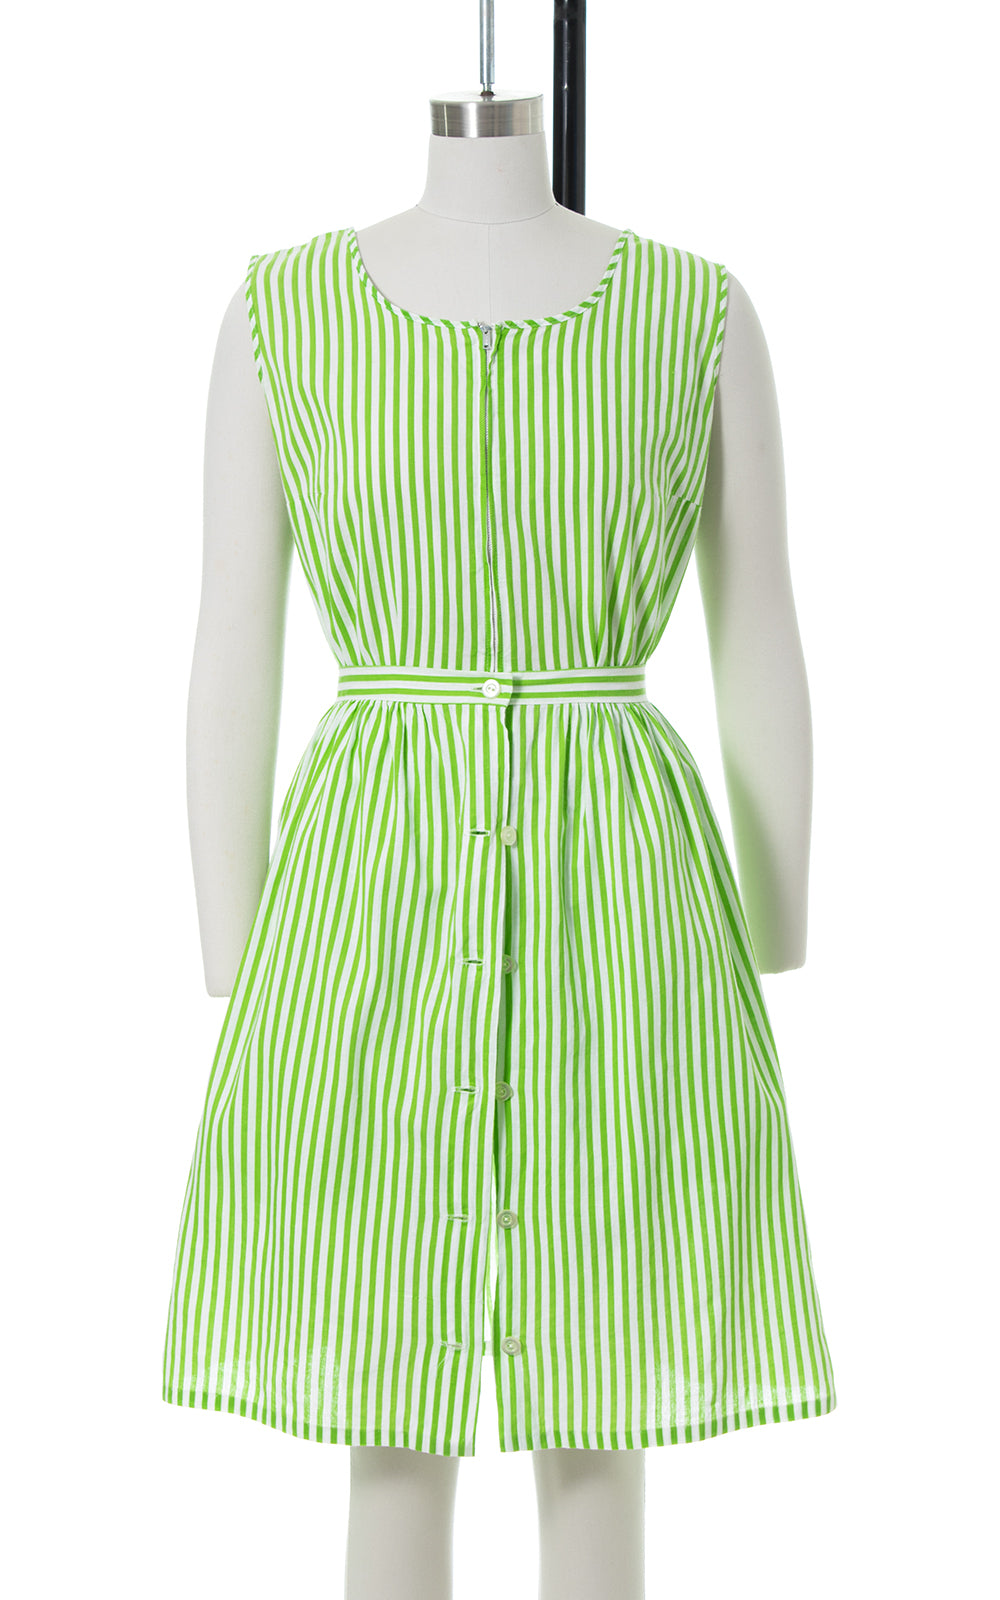 1940s 1950s Striped Cotton Romper & Skirt Playsuit